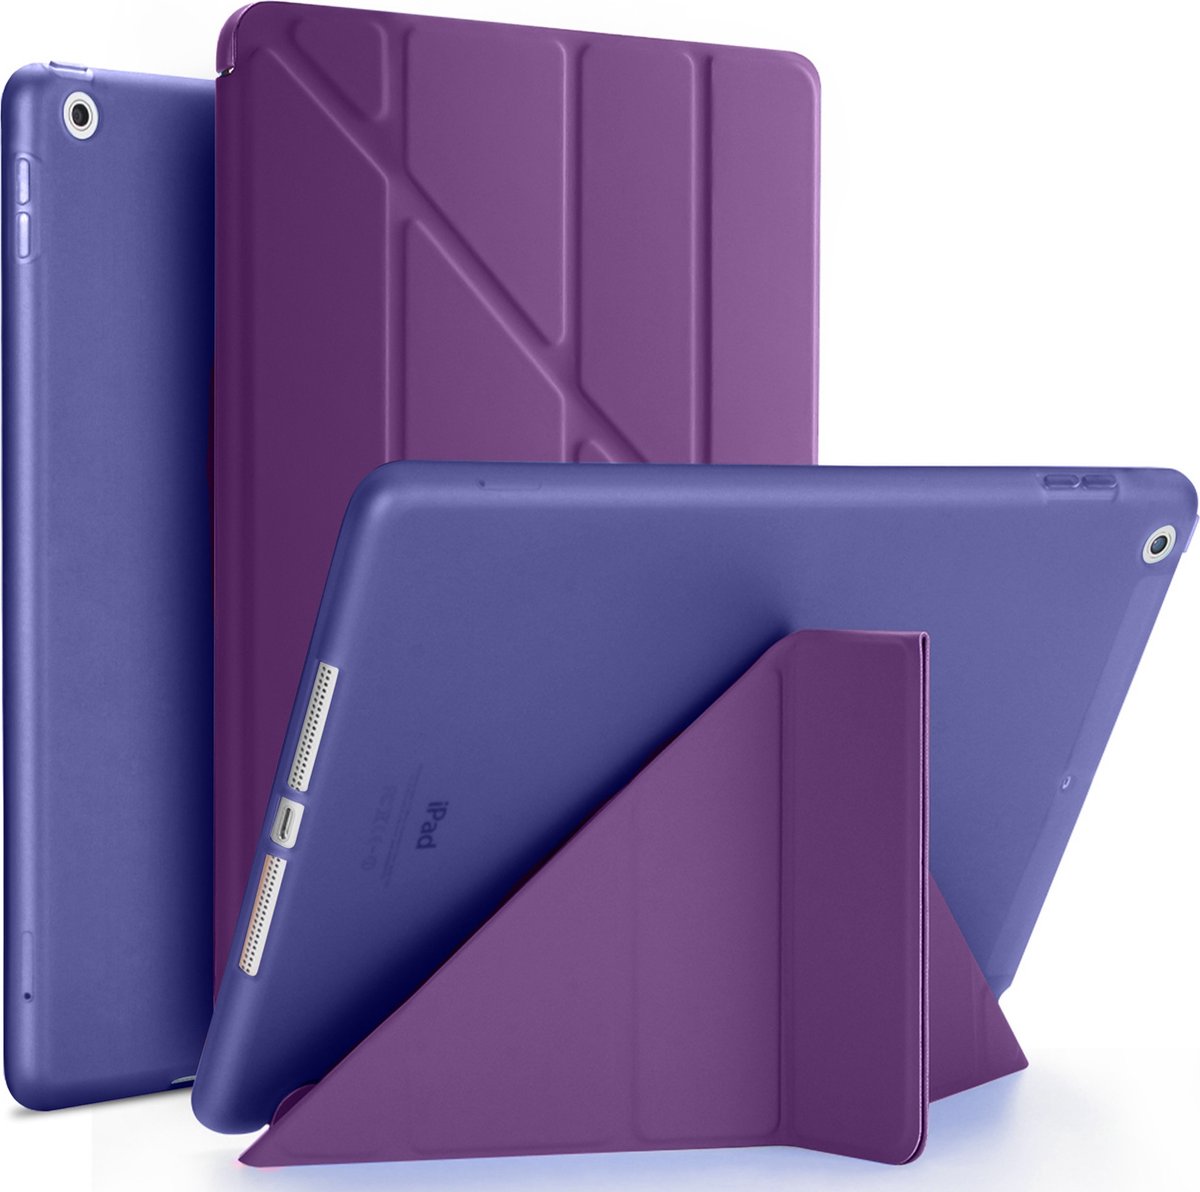 Tablet Hoes geschikt voor iPad Hoes 2013 - Air - 9.7 inch - Smart Cover - A1474 - A1475 - A1476 - Paars